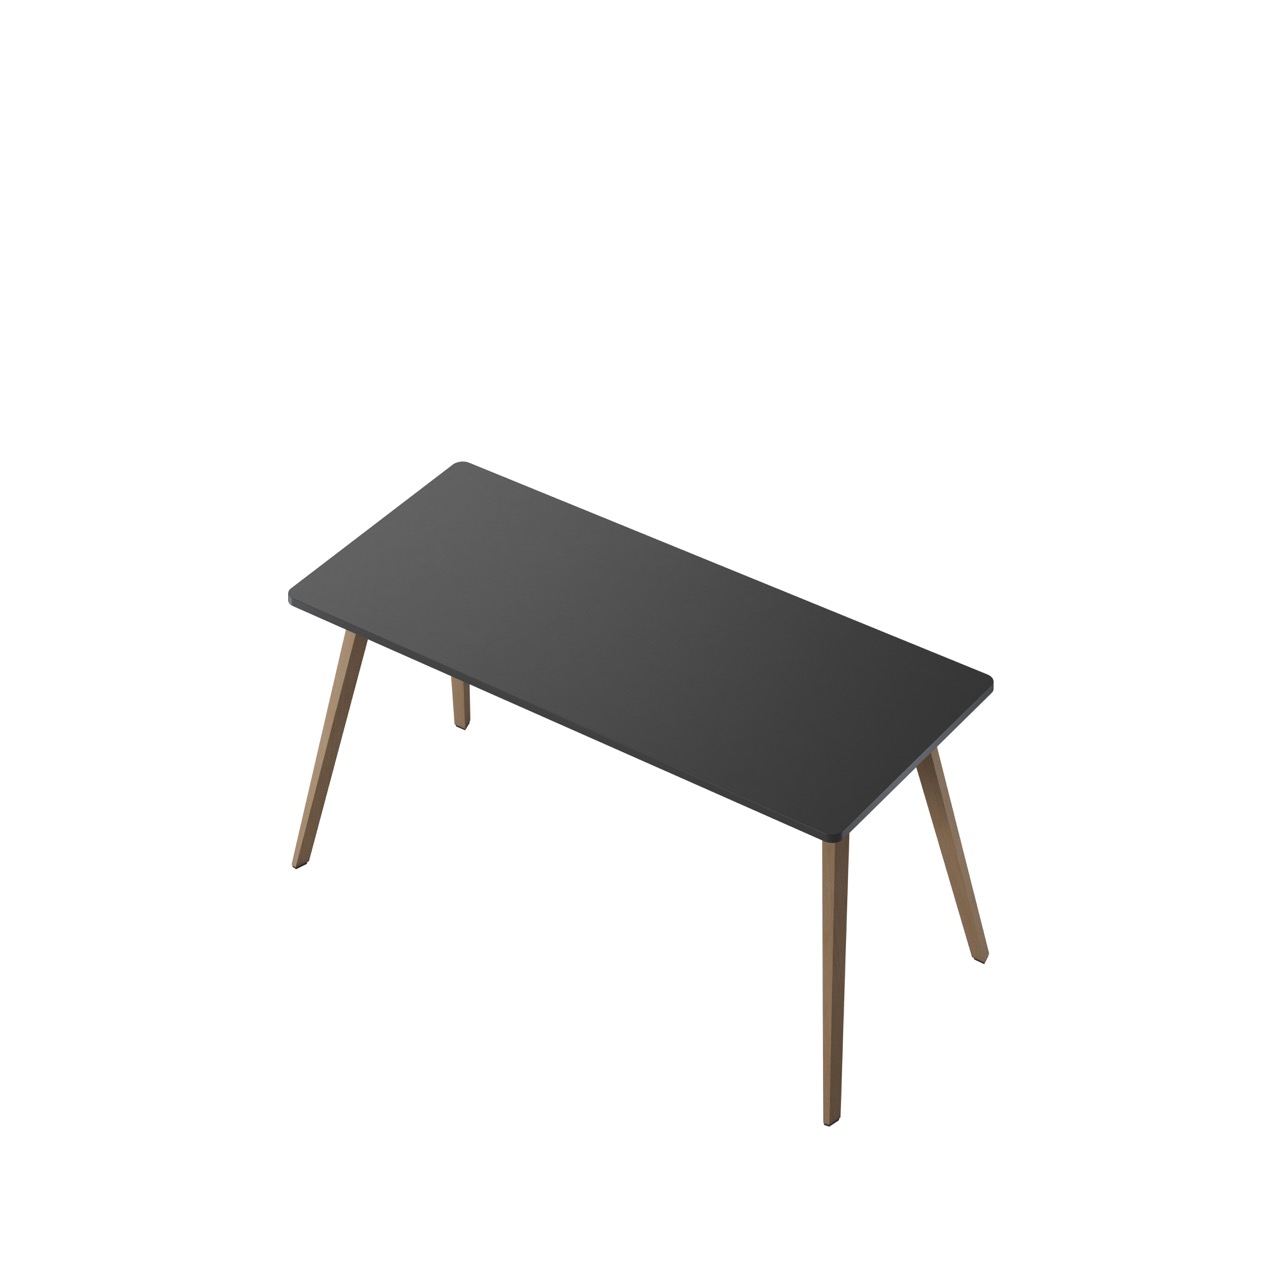 OCEE&FOUR - Tables - FourReal 74 - 180 x 80 - Wood - Packshot Image 1 Large